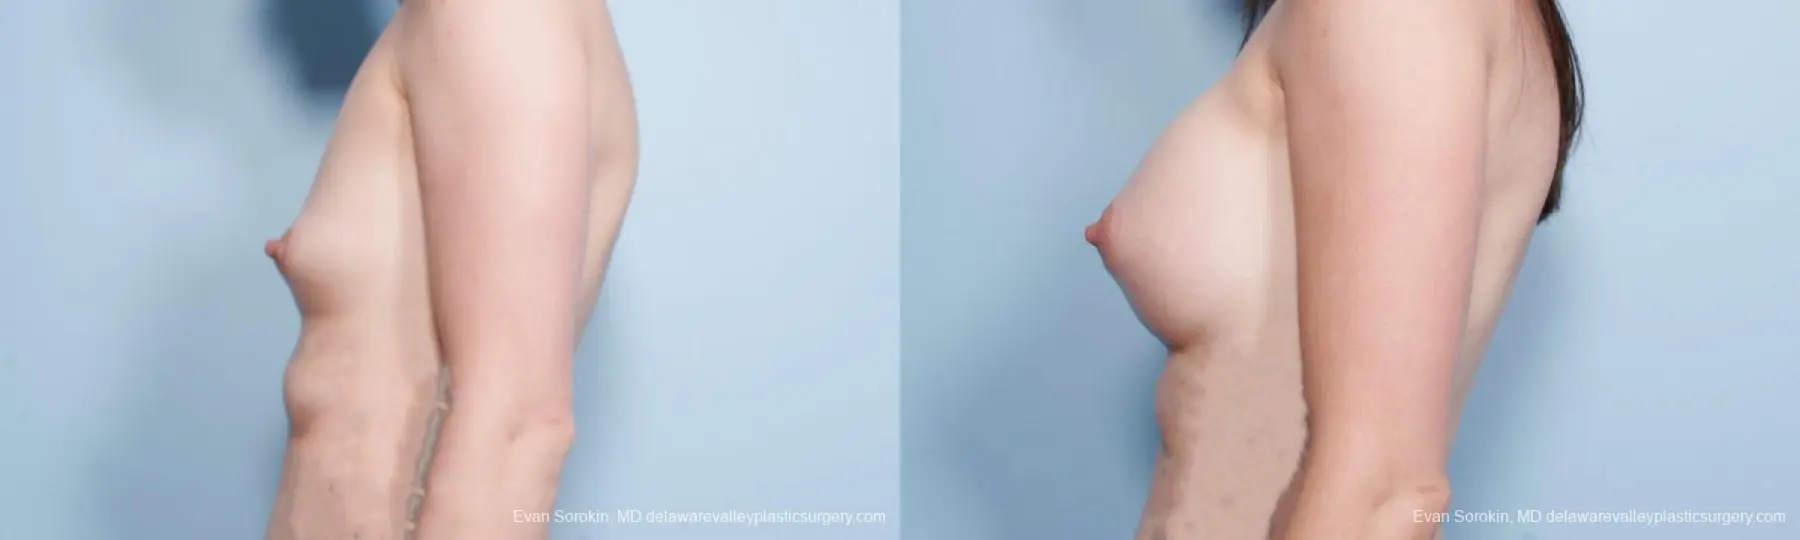 Philadelphia Breast Augmentation 9175 - Before and After 5